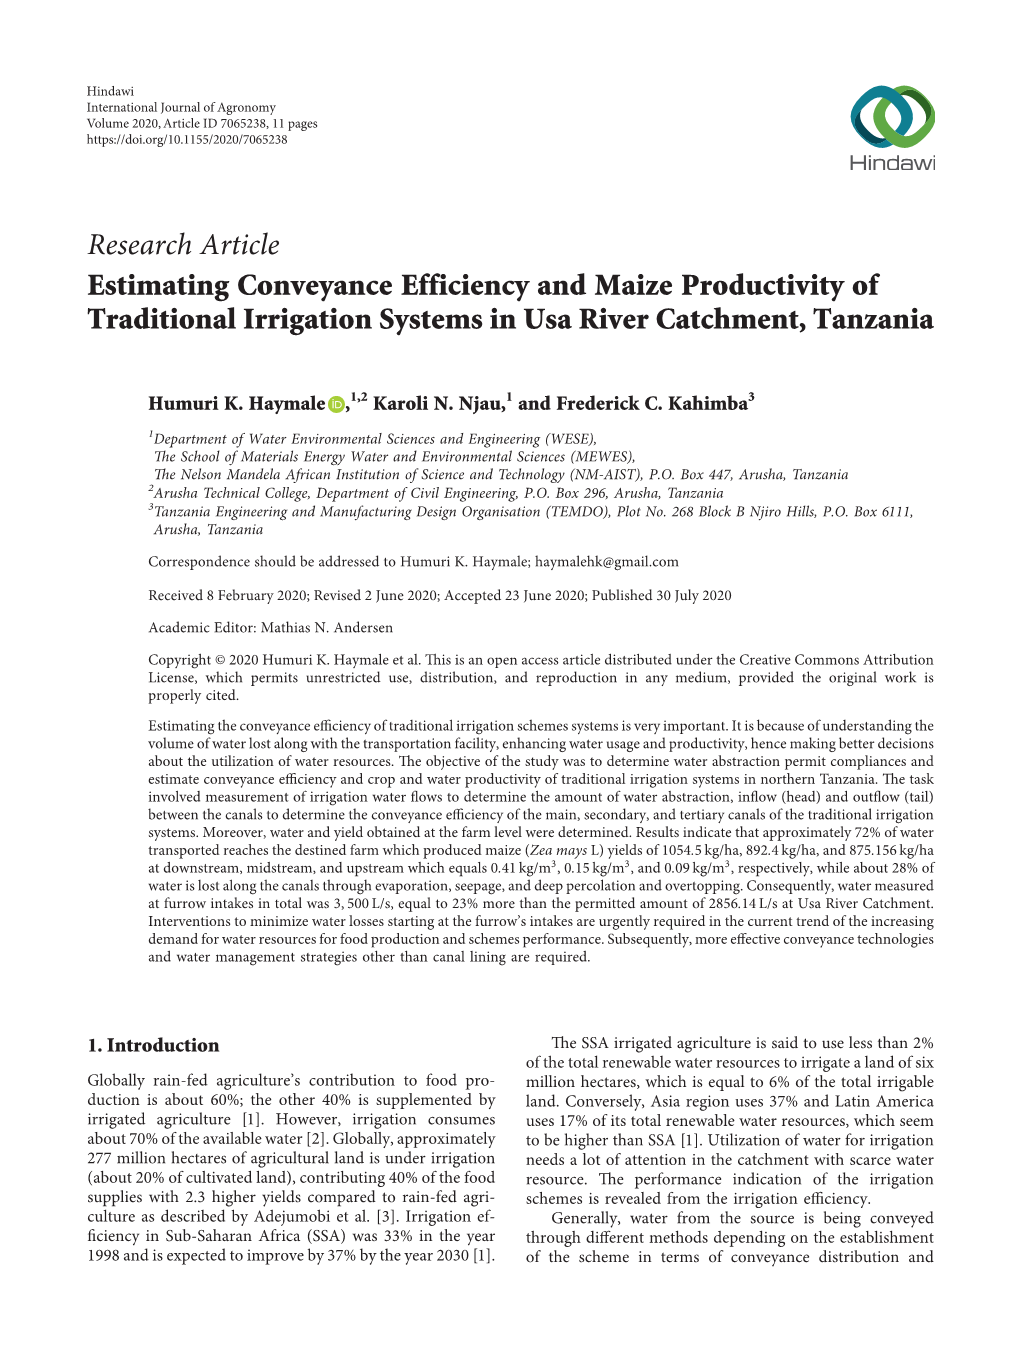 Research Article Estimating Conveyance Efficiency and Maize Productivity of Traditional Irrigation Systems in Usa River Catchment, Tanzania